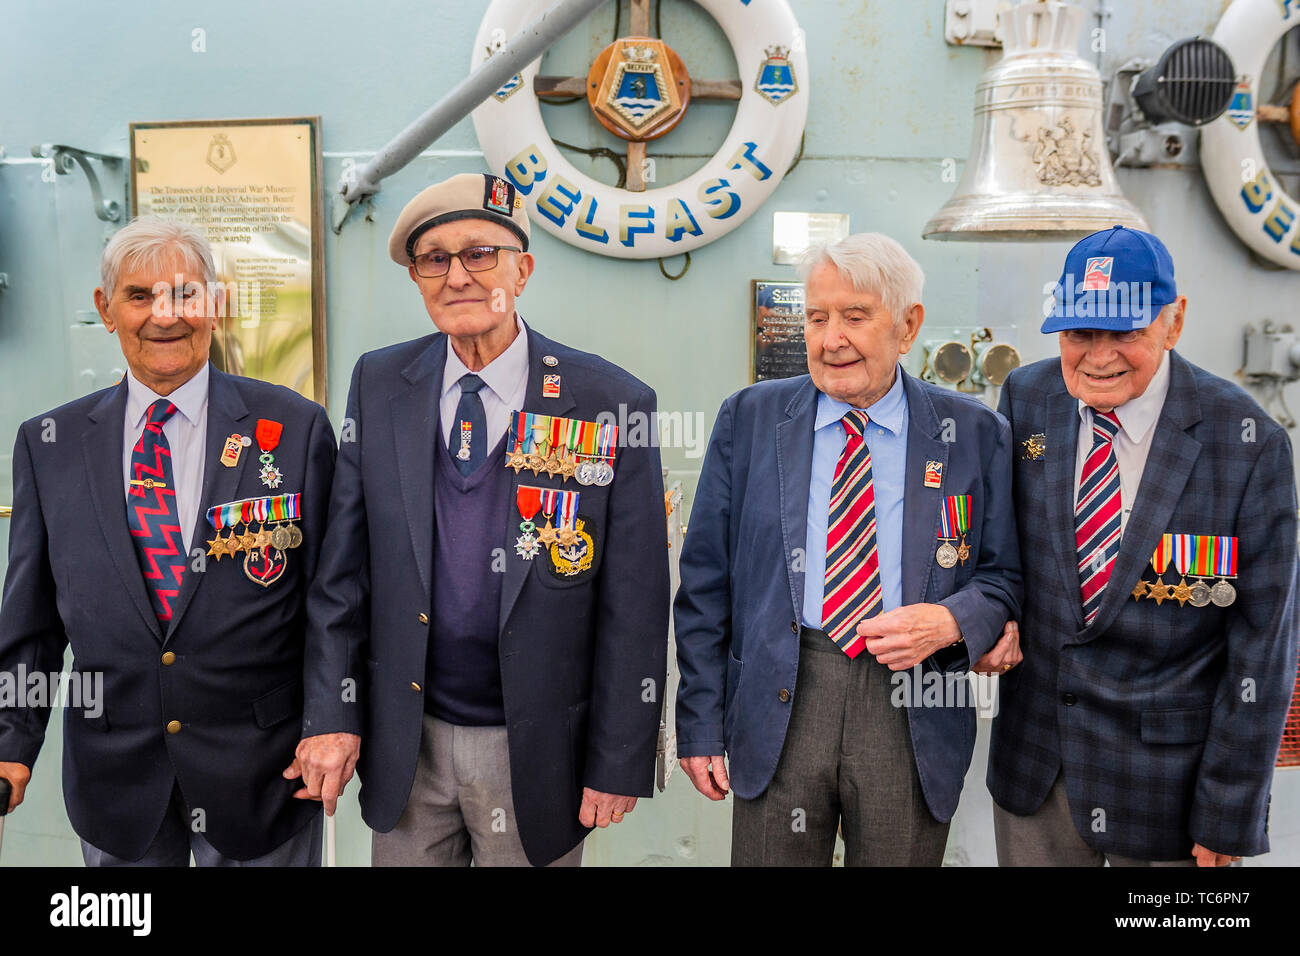 London, UK. 06th June, 2019. Arthur Barnes, John Connelly, Nev Lees and Bob Jones - D-Day Veterans from the Blind Veterans Association - Imperial War Museums marks the 75th anniversary of the D-Day landings on board HMS Belfast. Credit: Guy Bell/Alamy Live News Stock Photo